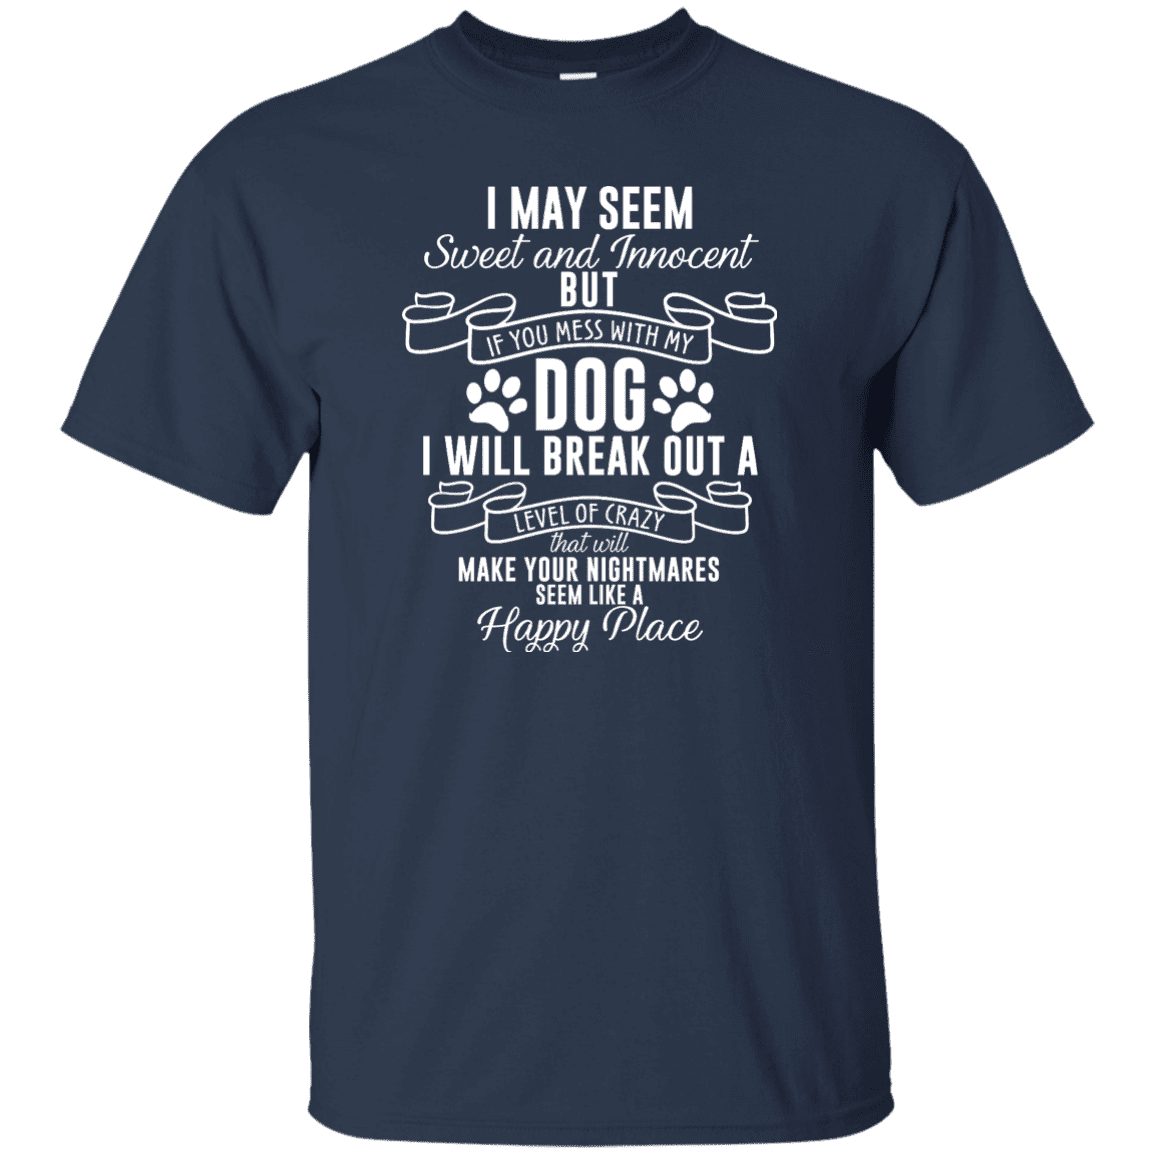 I May Seem Sweet And Innocent - T Shirt.